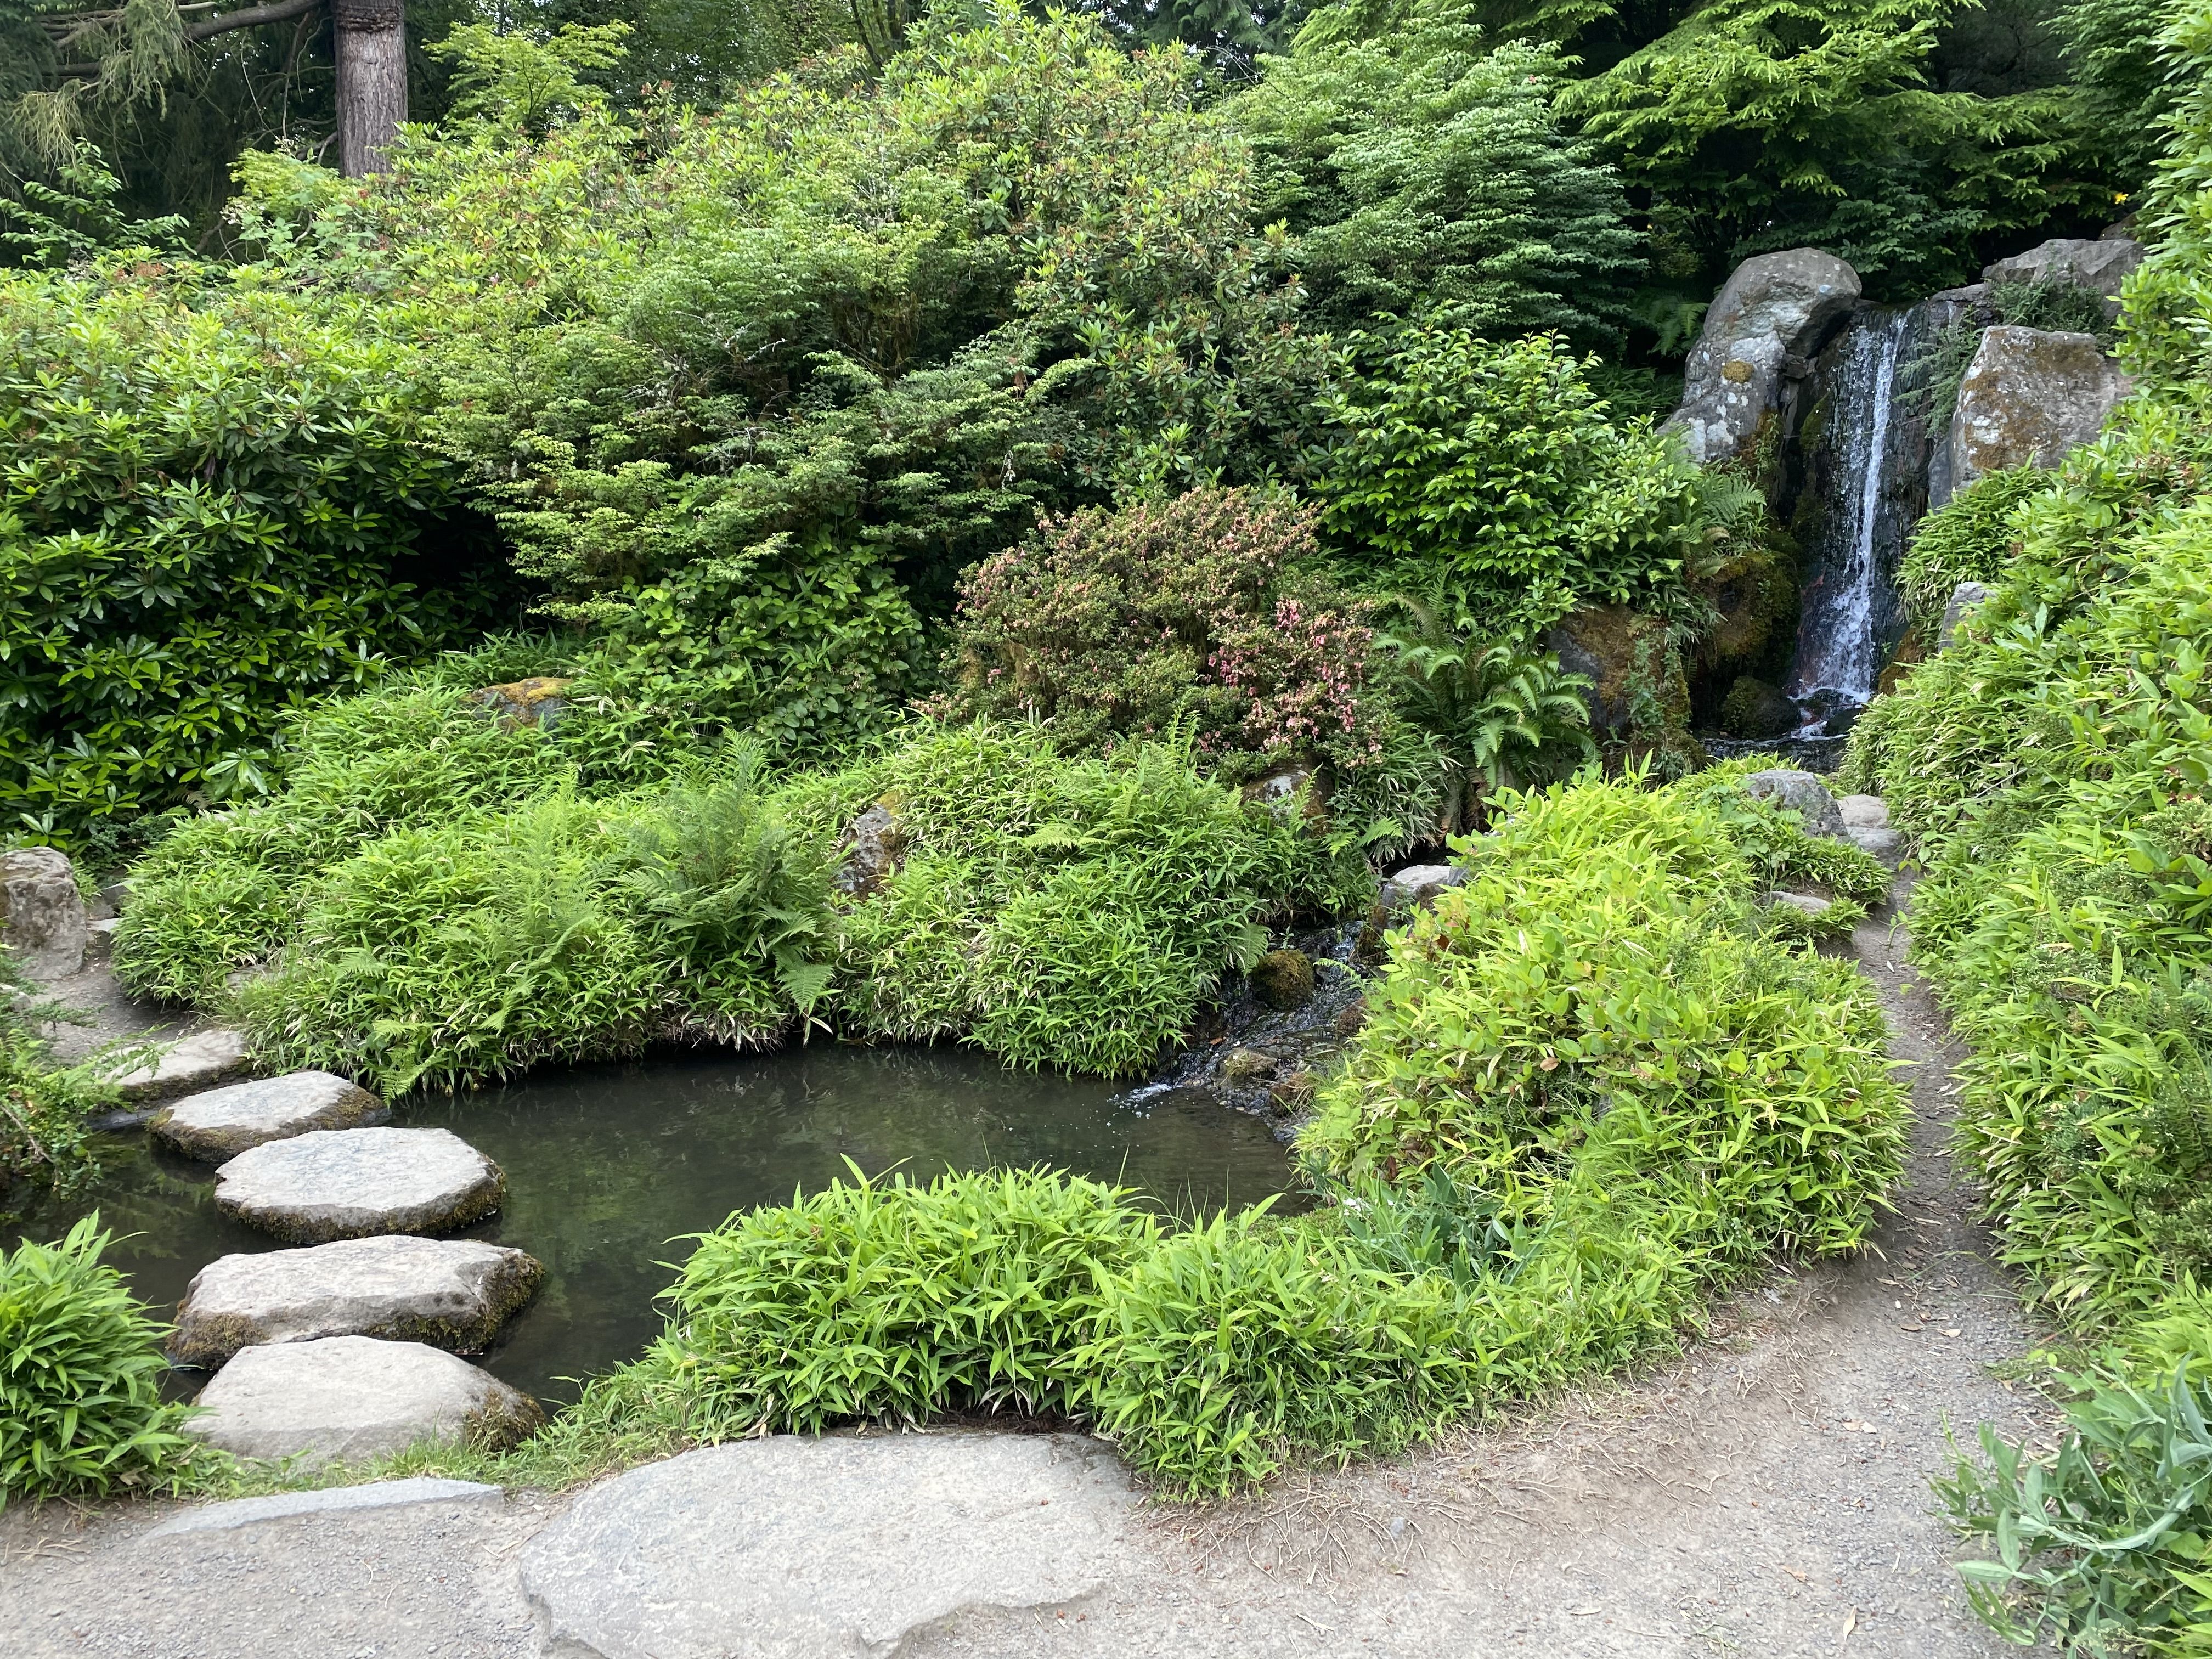 A waterfall amid carefully cultivated bushes and other plants, with a stone walkway over a pond.